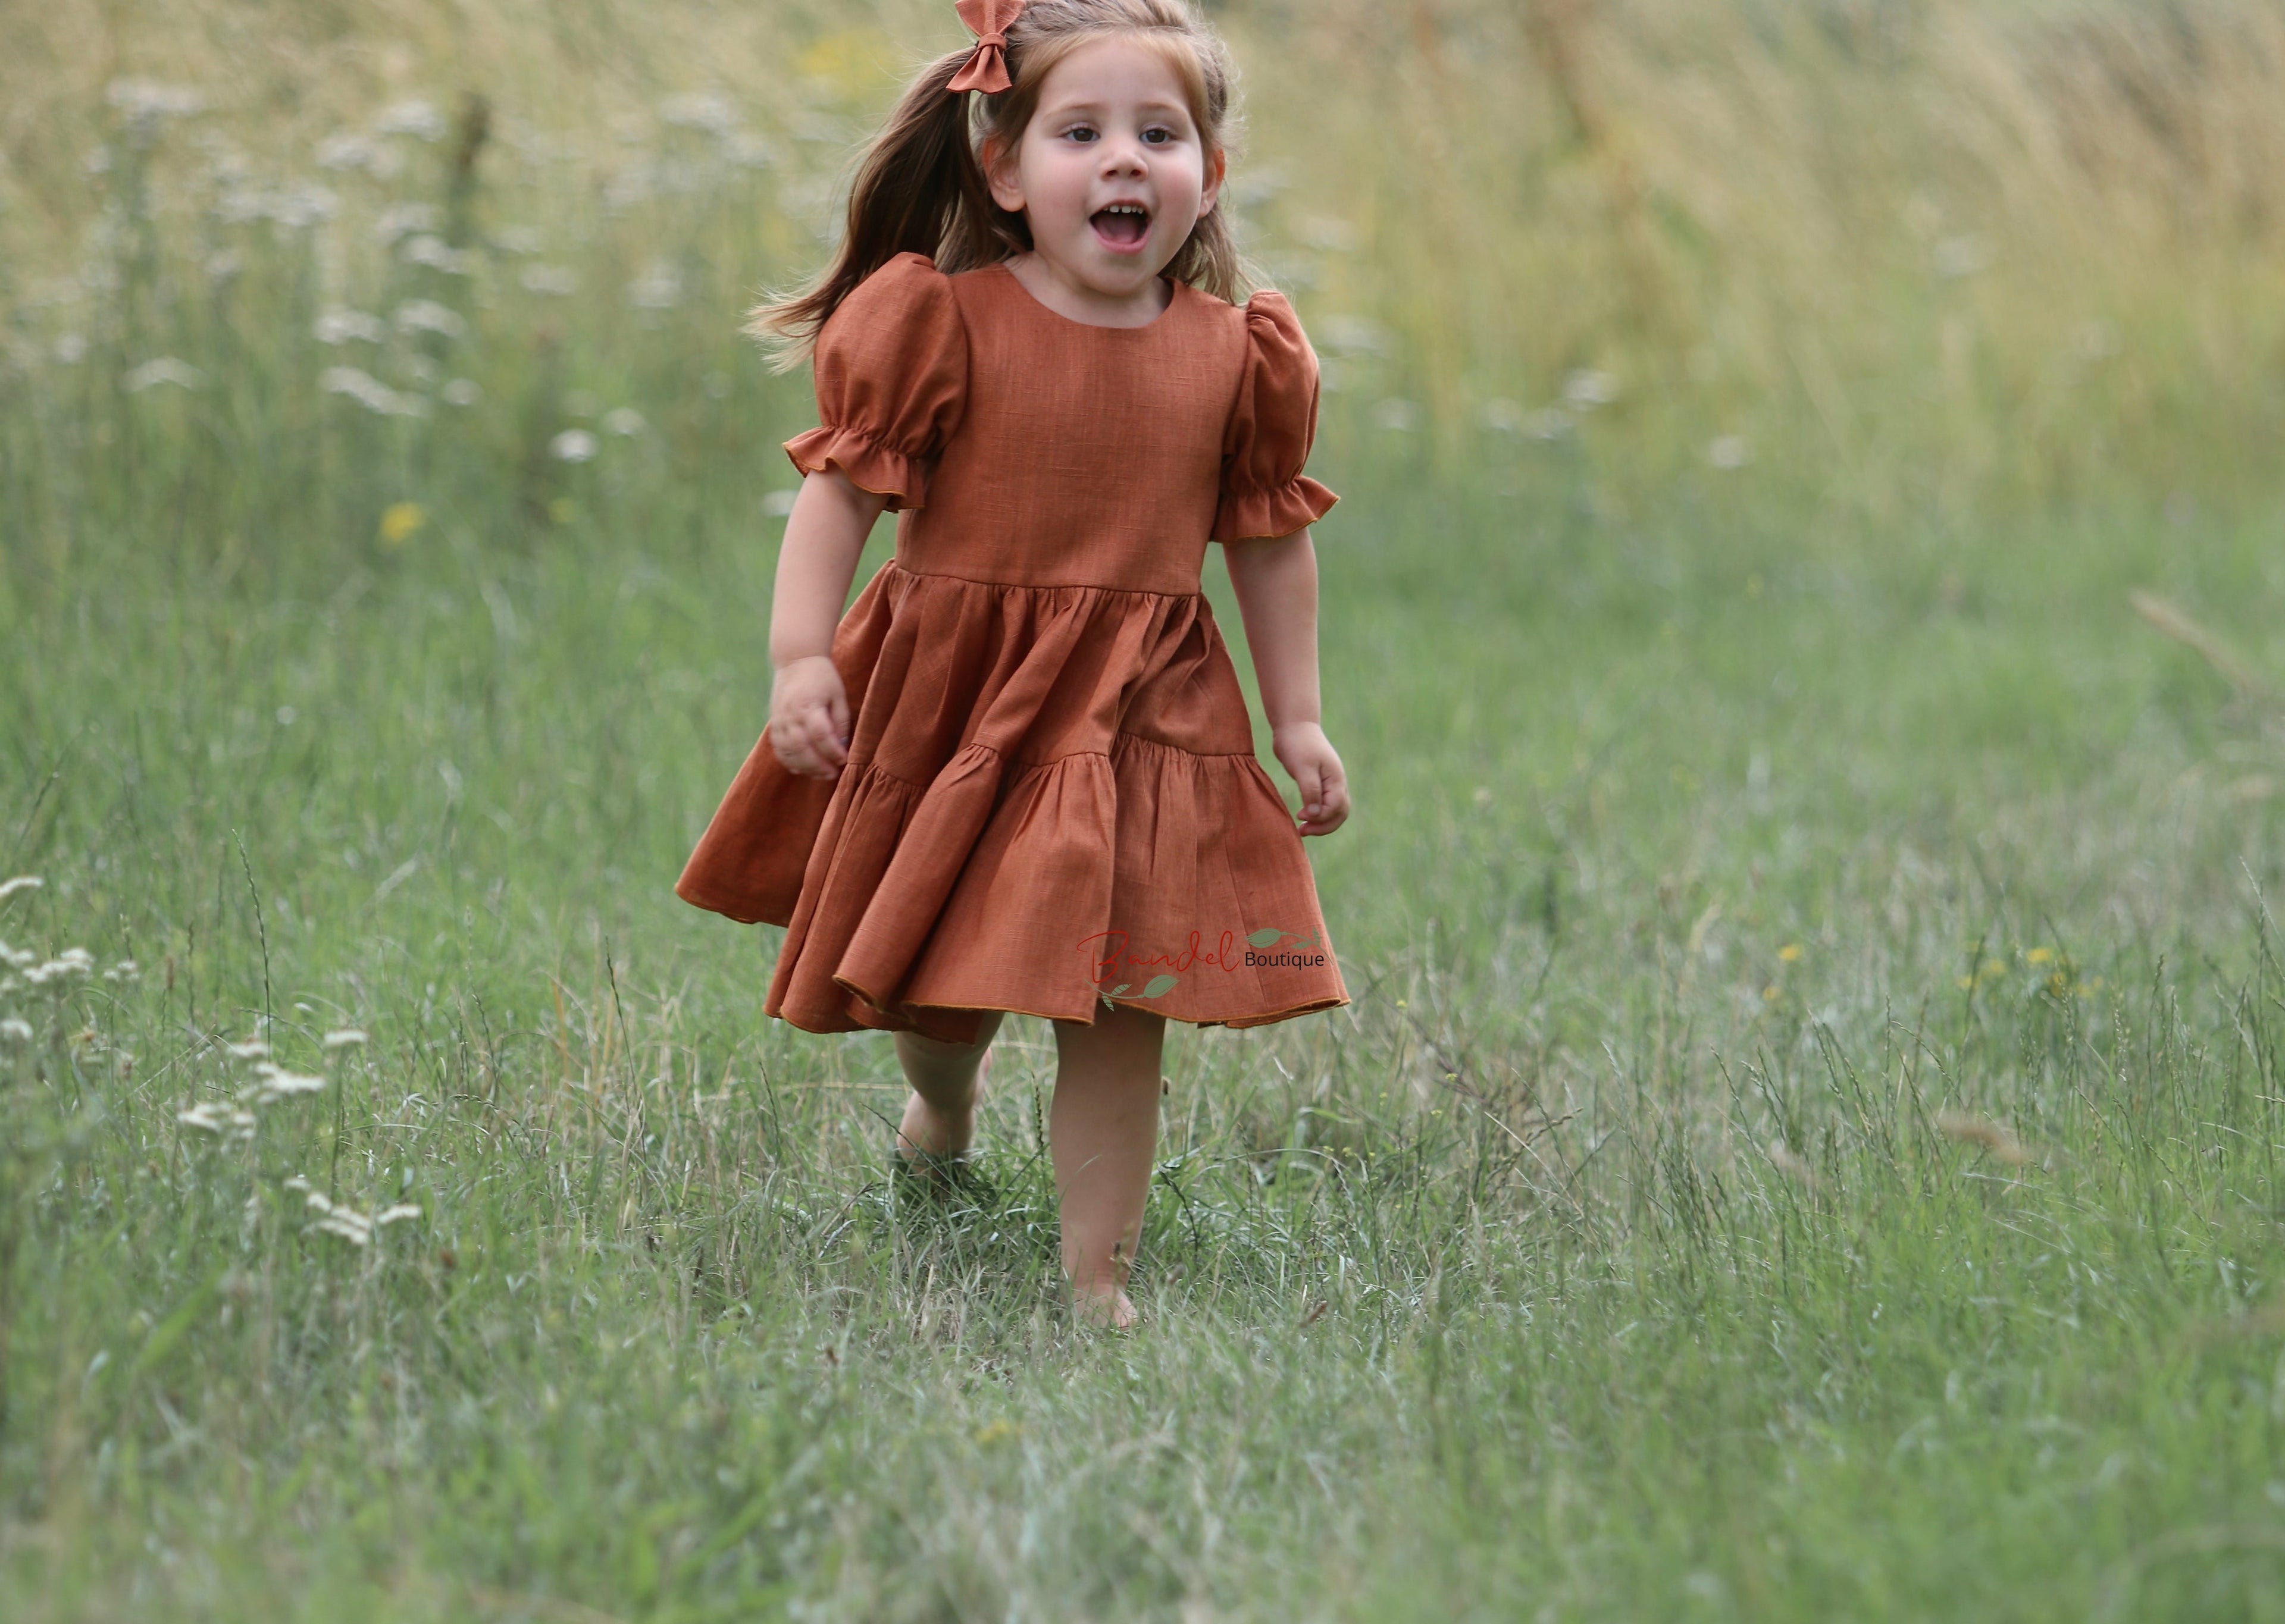 Linen Rust Dress is the perfect special-occasion look for your little flower girl. Made of breathable linen and featuring a square neckline, flutter sleeves, and a playful ruffle hem, this design is both comfortable and fashionable. The back of the dress has a double row of rustic wooden buttons for an elegant finishing touch.